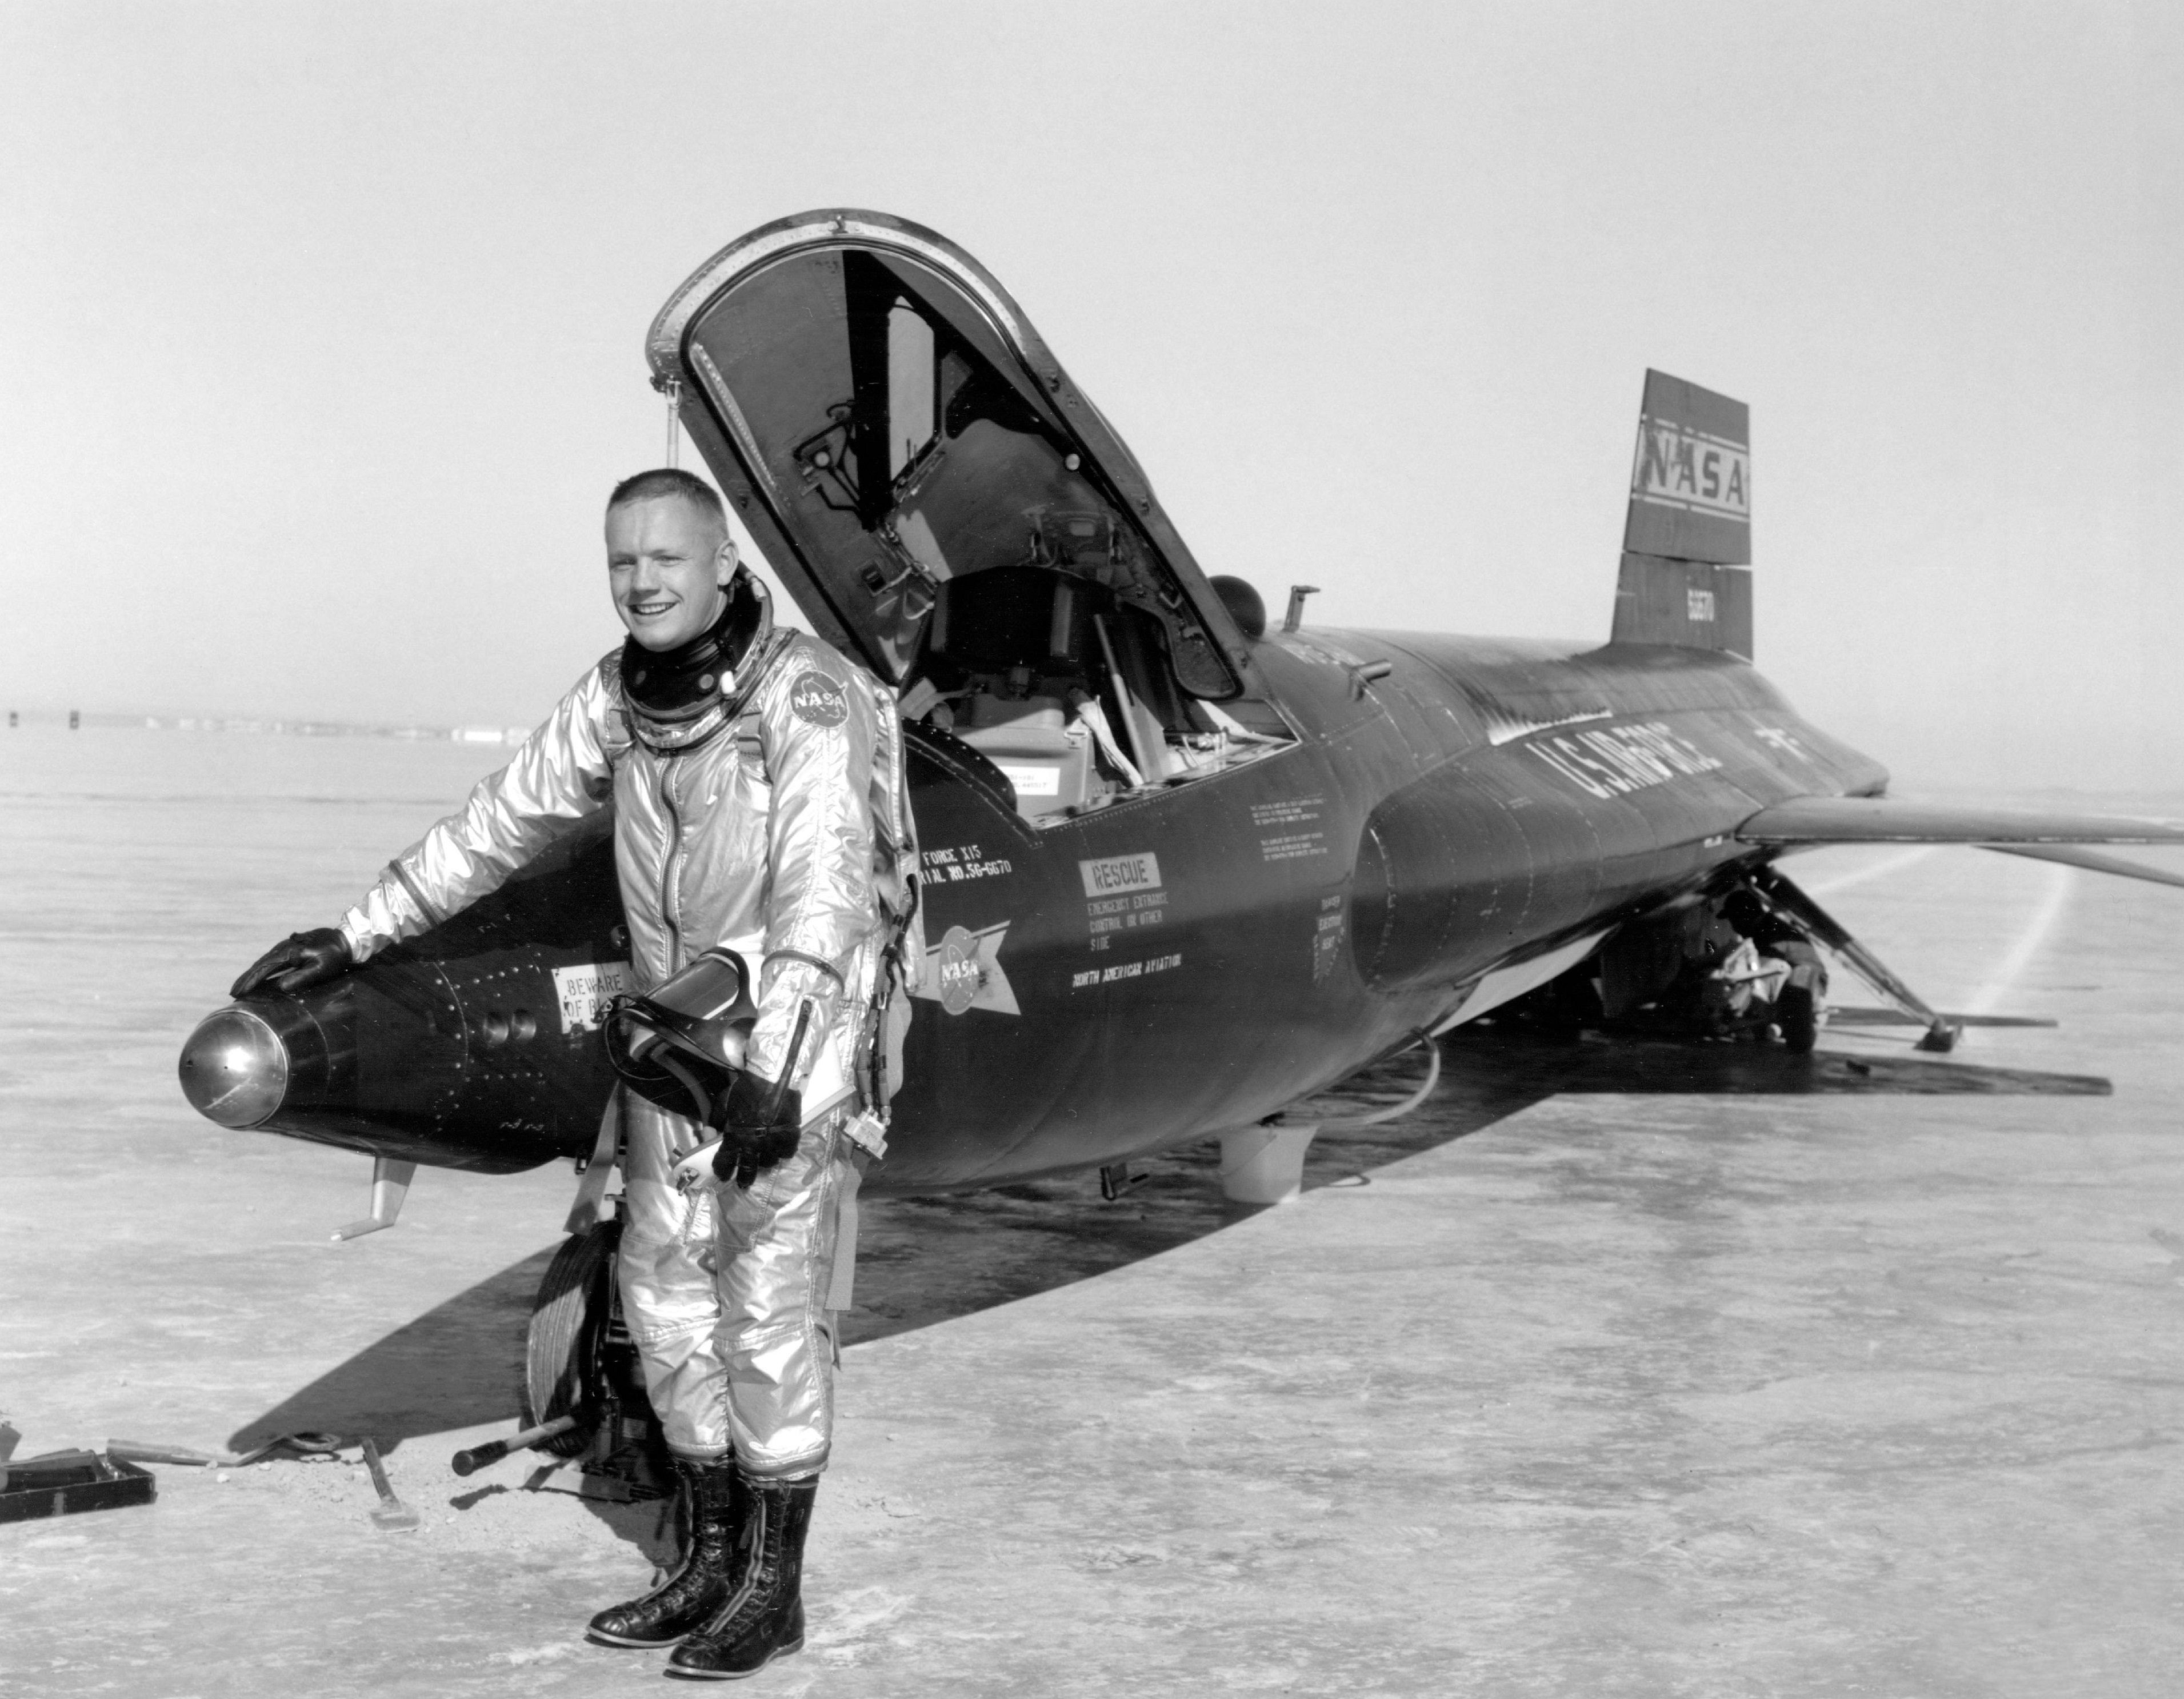 Neil Armstrong with the first North American Aviation X-15A, 56-6670, on Rogers Dry Lake after a flight, 1960. His hand is resting on the rocketplane's ball nose sensor. (NASA)